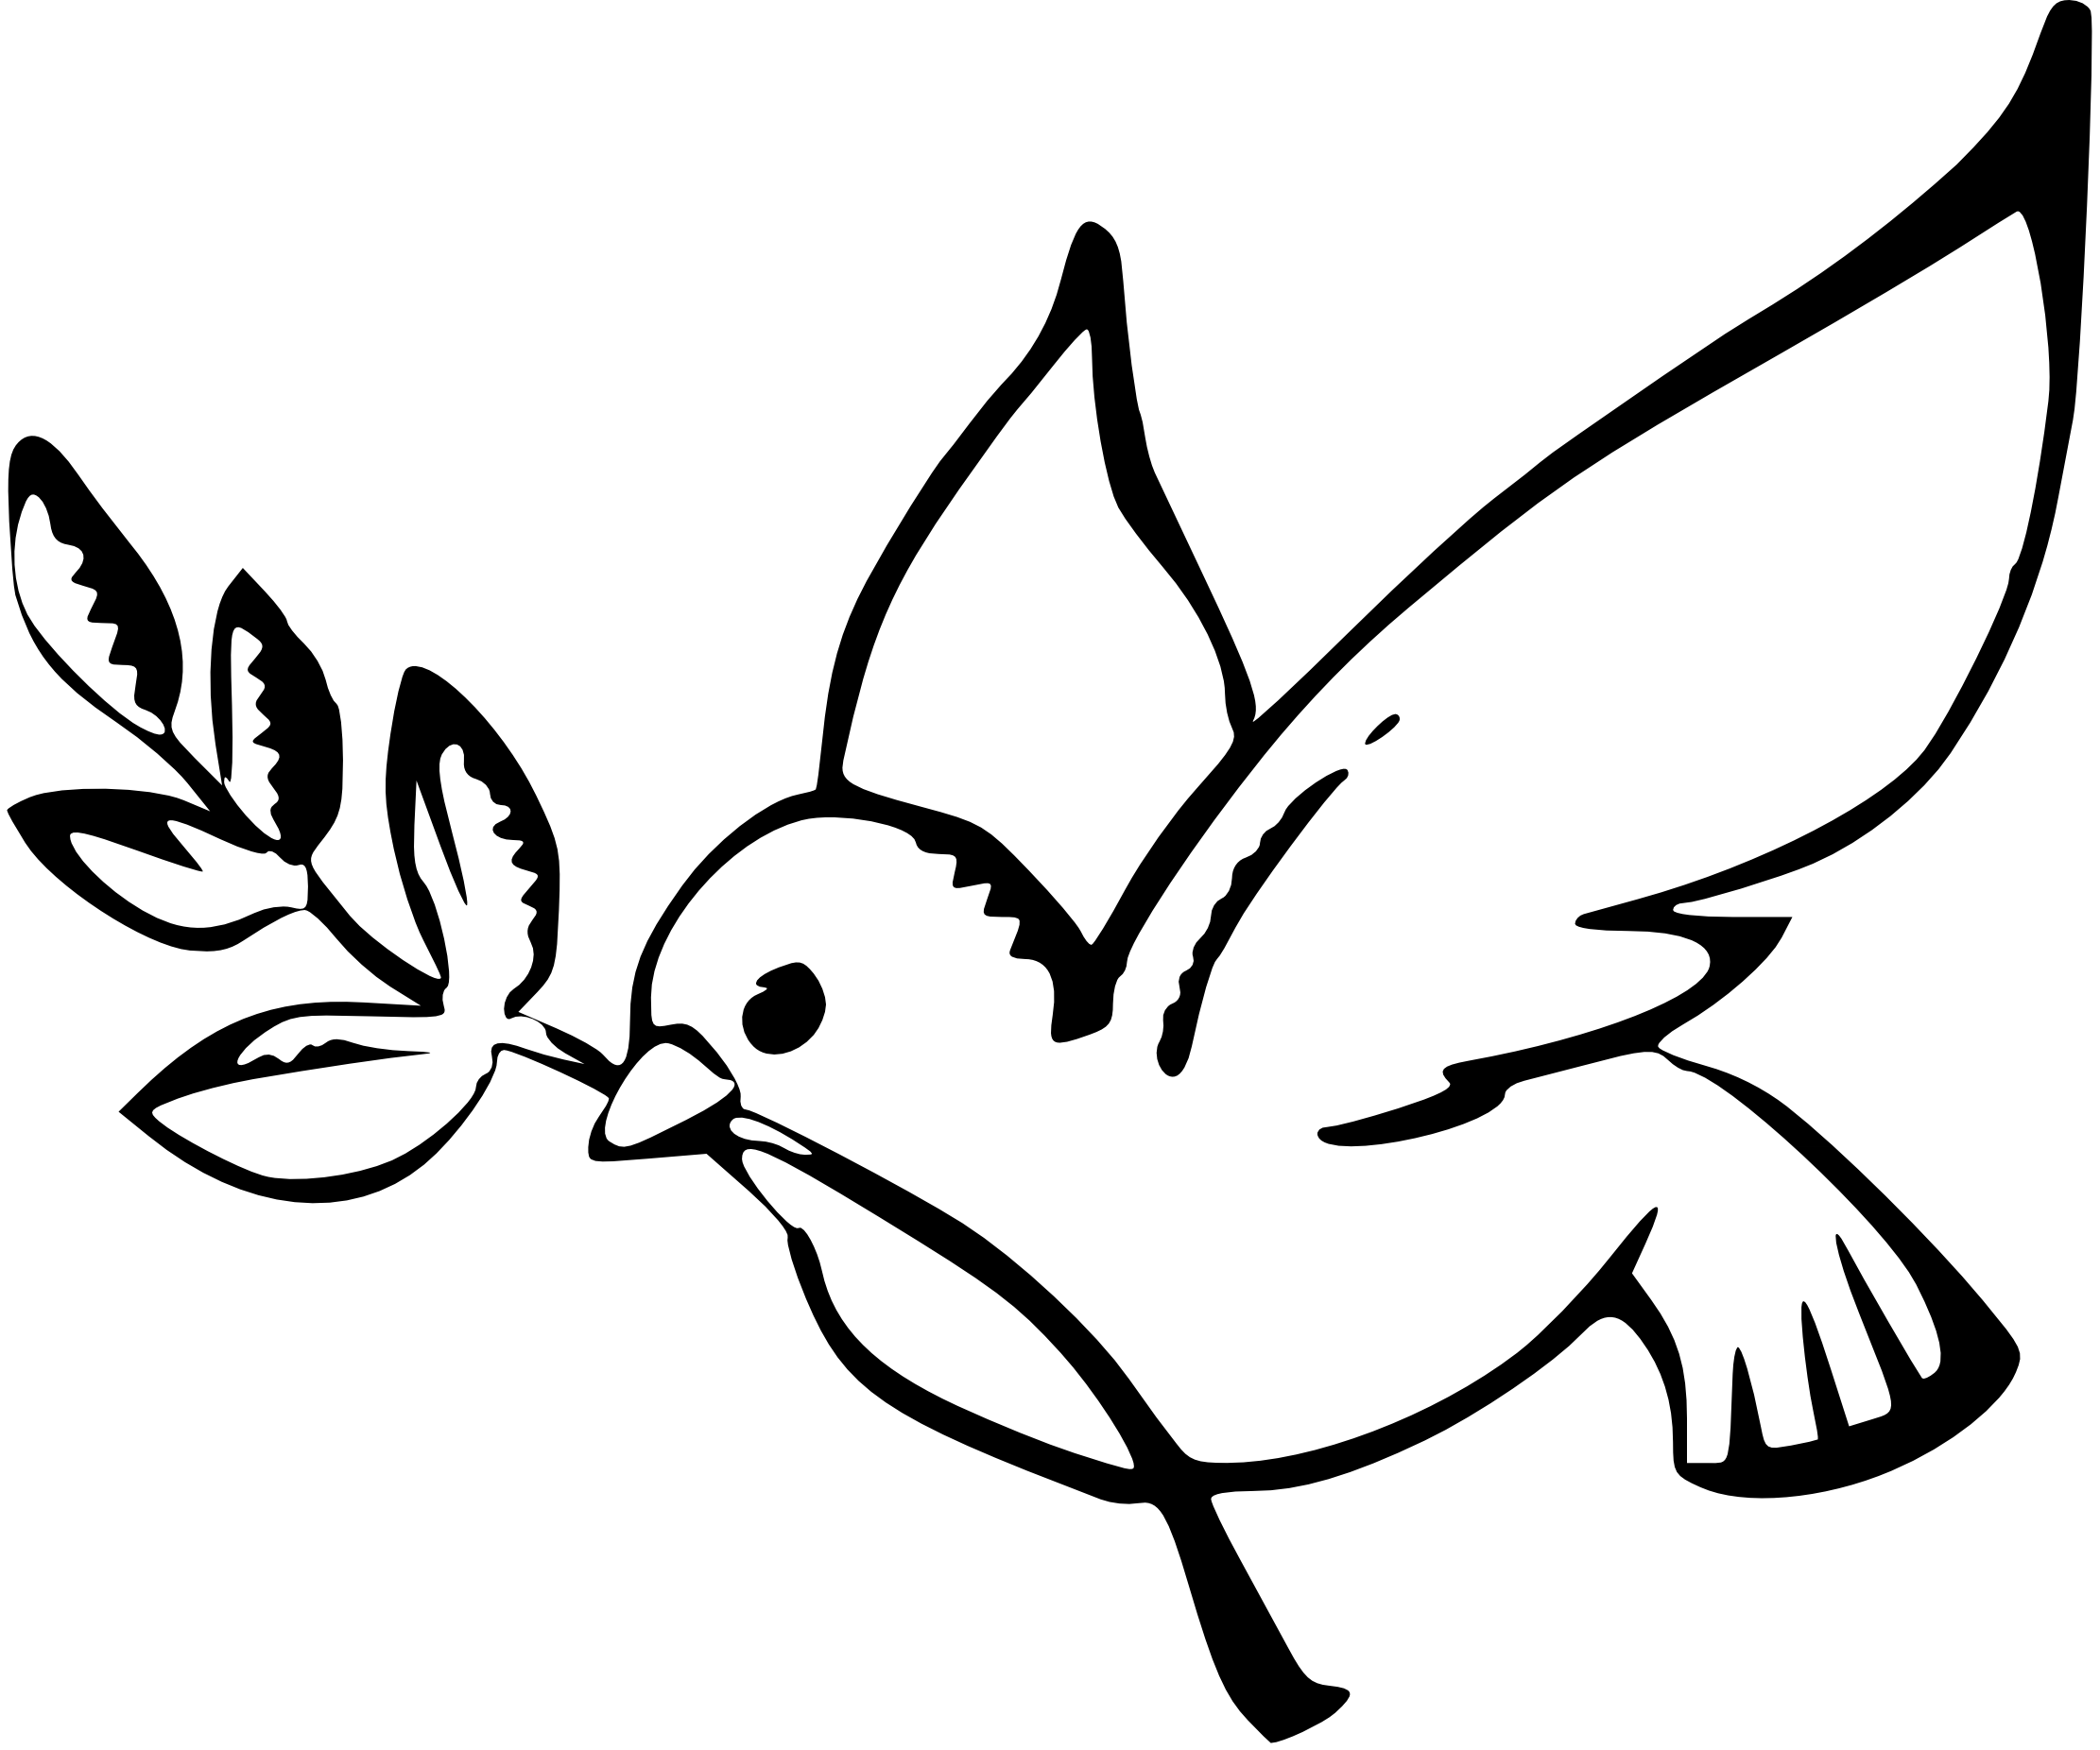 Dove Line Drawing - Clipart library